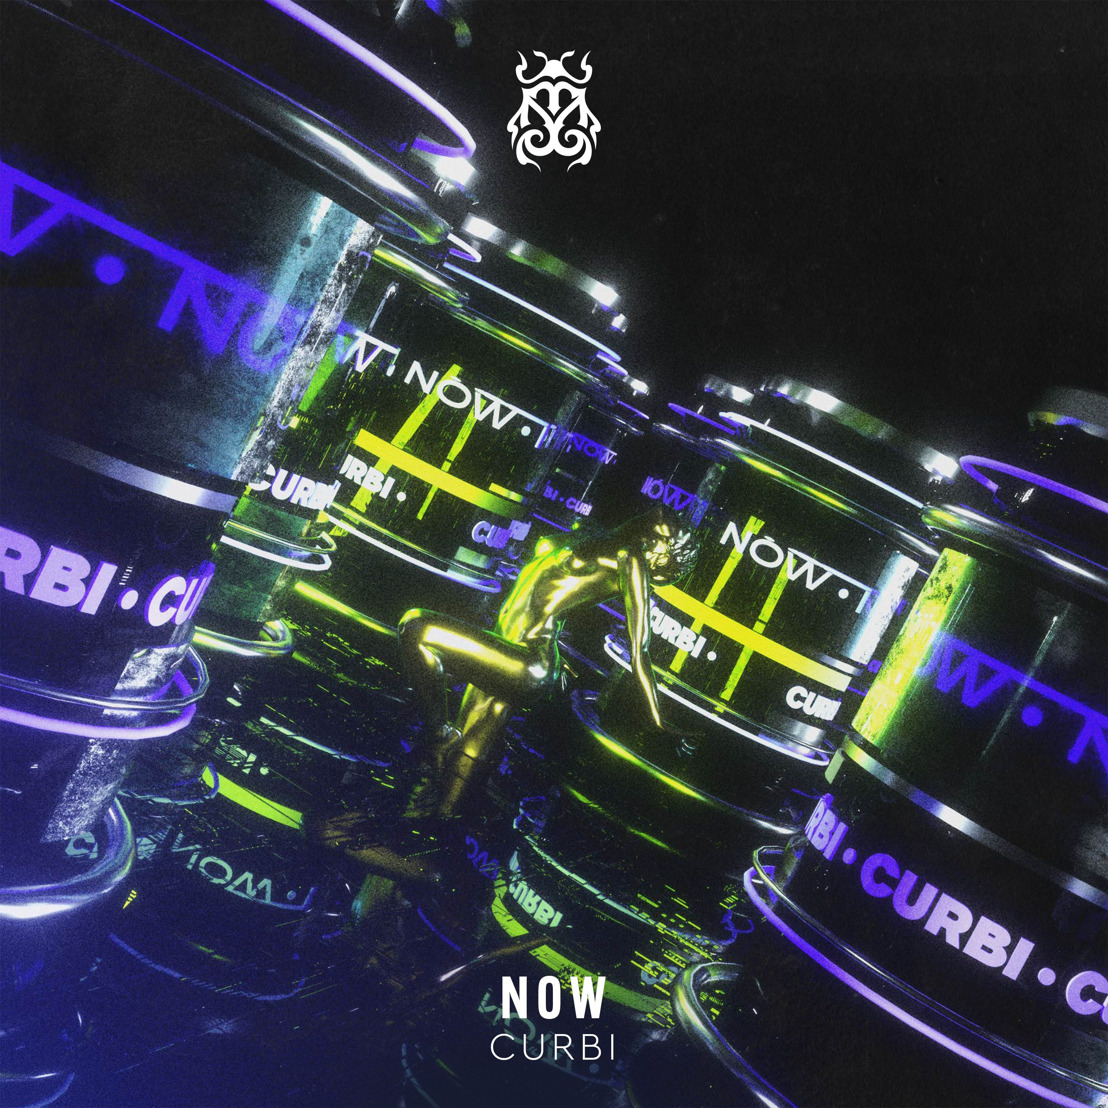 Curbi unveils melodic house track ‘Now’